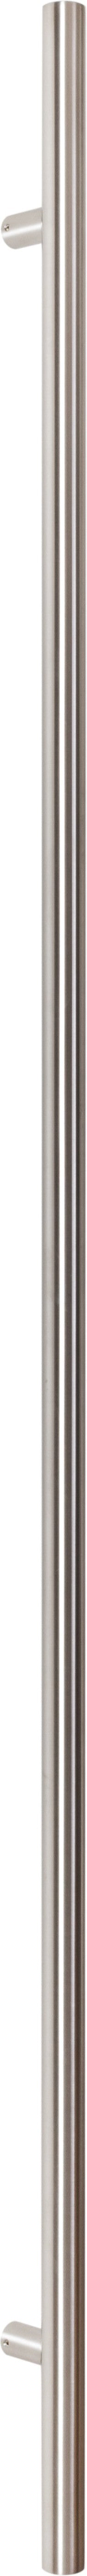 Sure-Loc 48" Round Long Door Pull, Single-Sided in Satin Stainless Steel finish